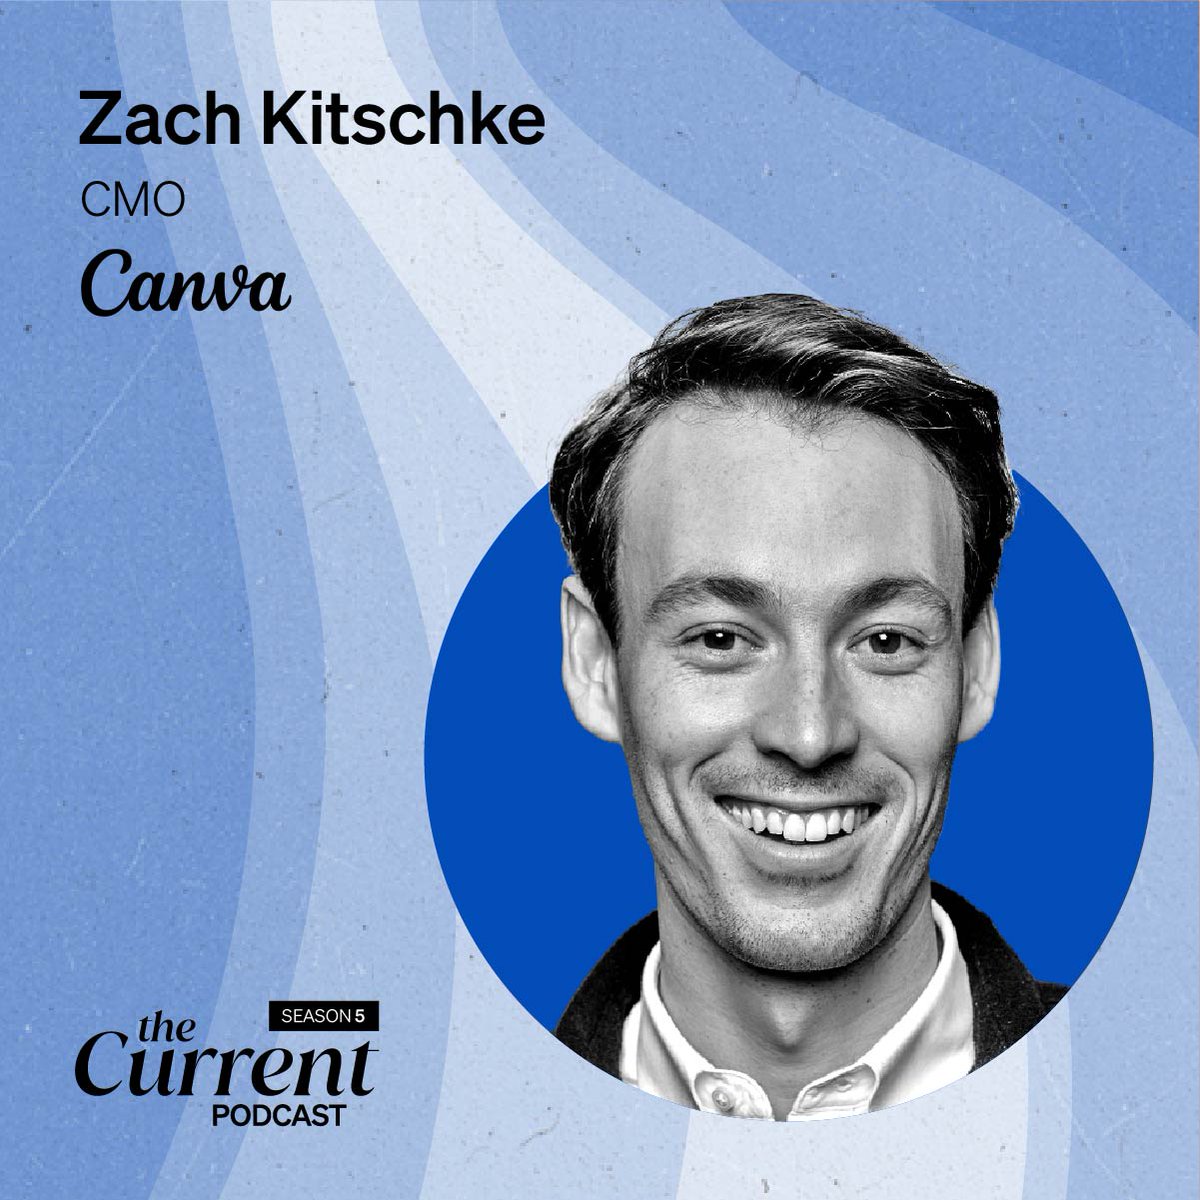 .@Canva’s CMO Zach Kitschke shares how the brand is innovating with artificial intelligence (AI), evolving from its roots in a Perth classroom to a global giant, and why design literacy is increasingly important. Listen on The Current Podcast: bit.ly/3Nd6nyN